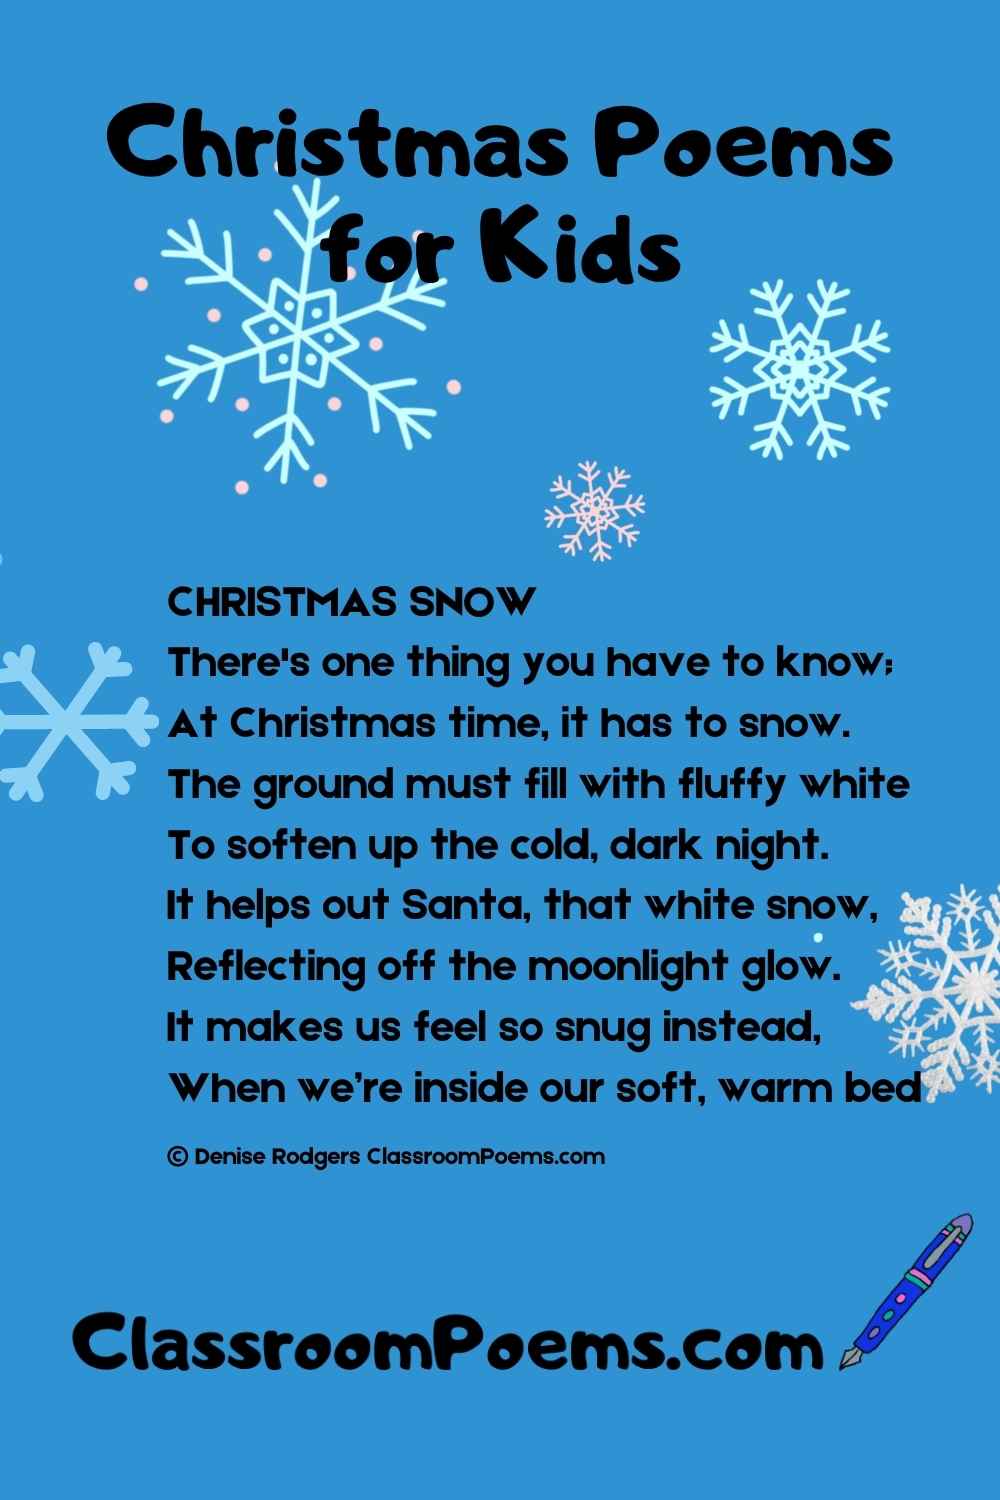 Christmas snow poem for kids by Denise Rodgers on ClassroomPoems.com.